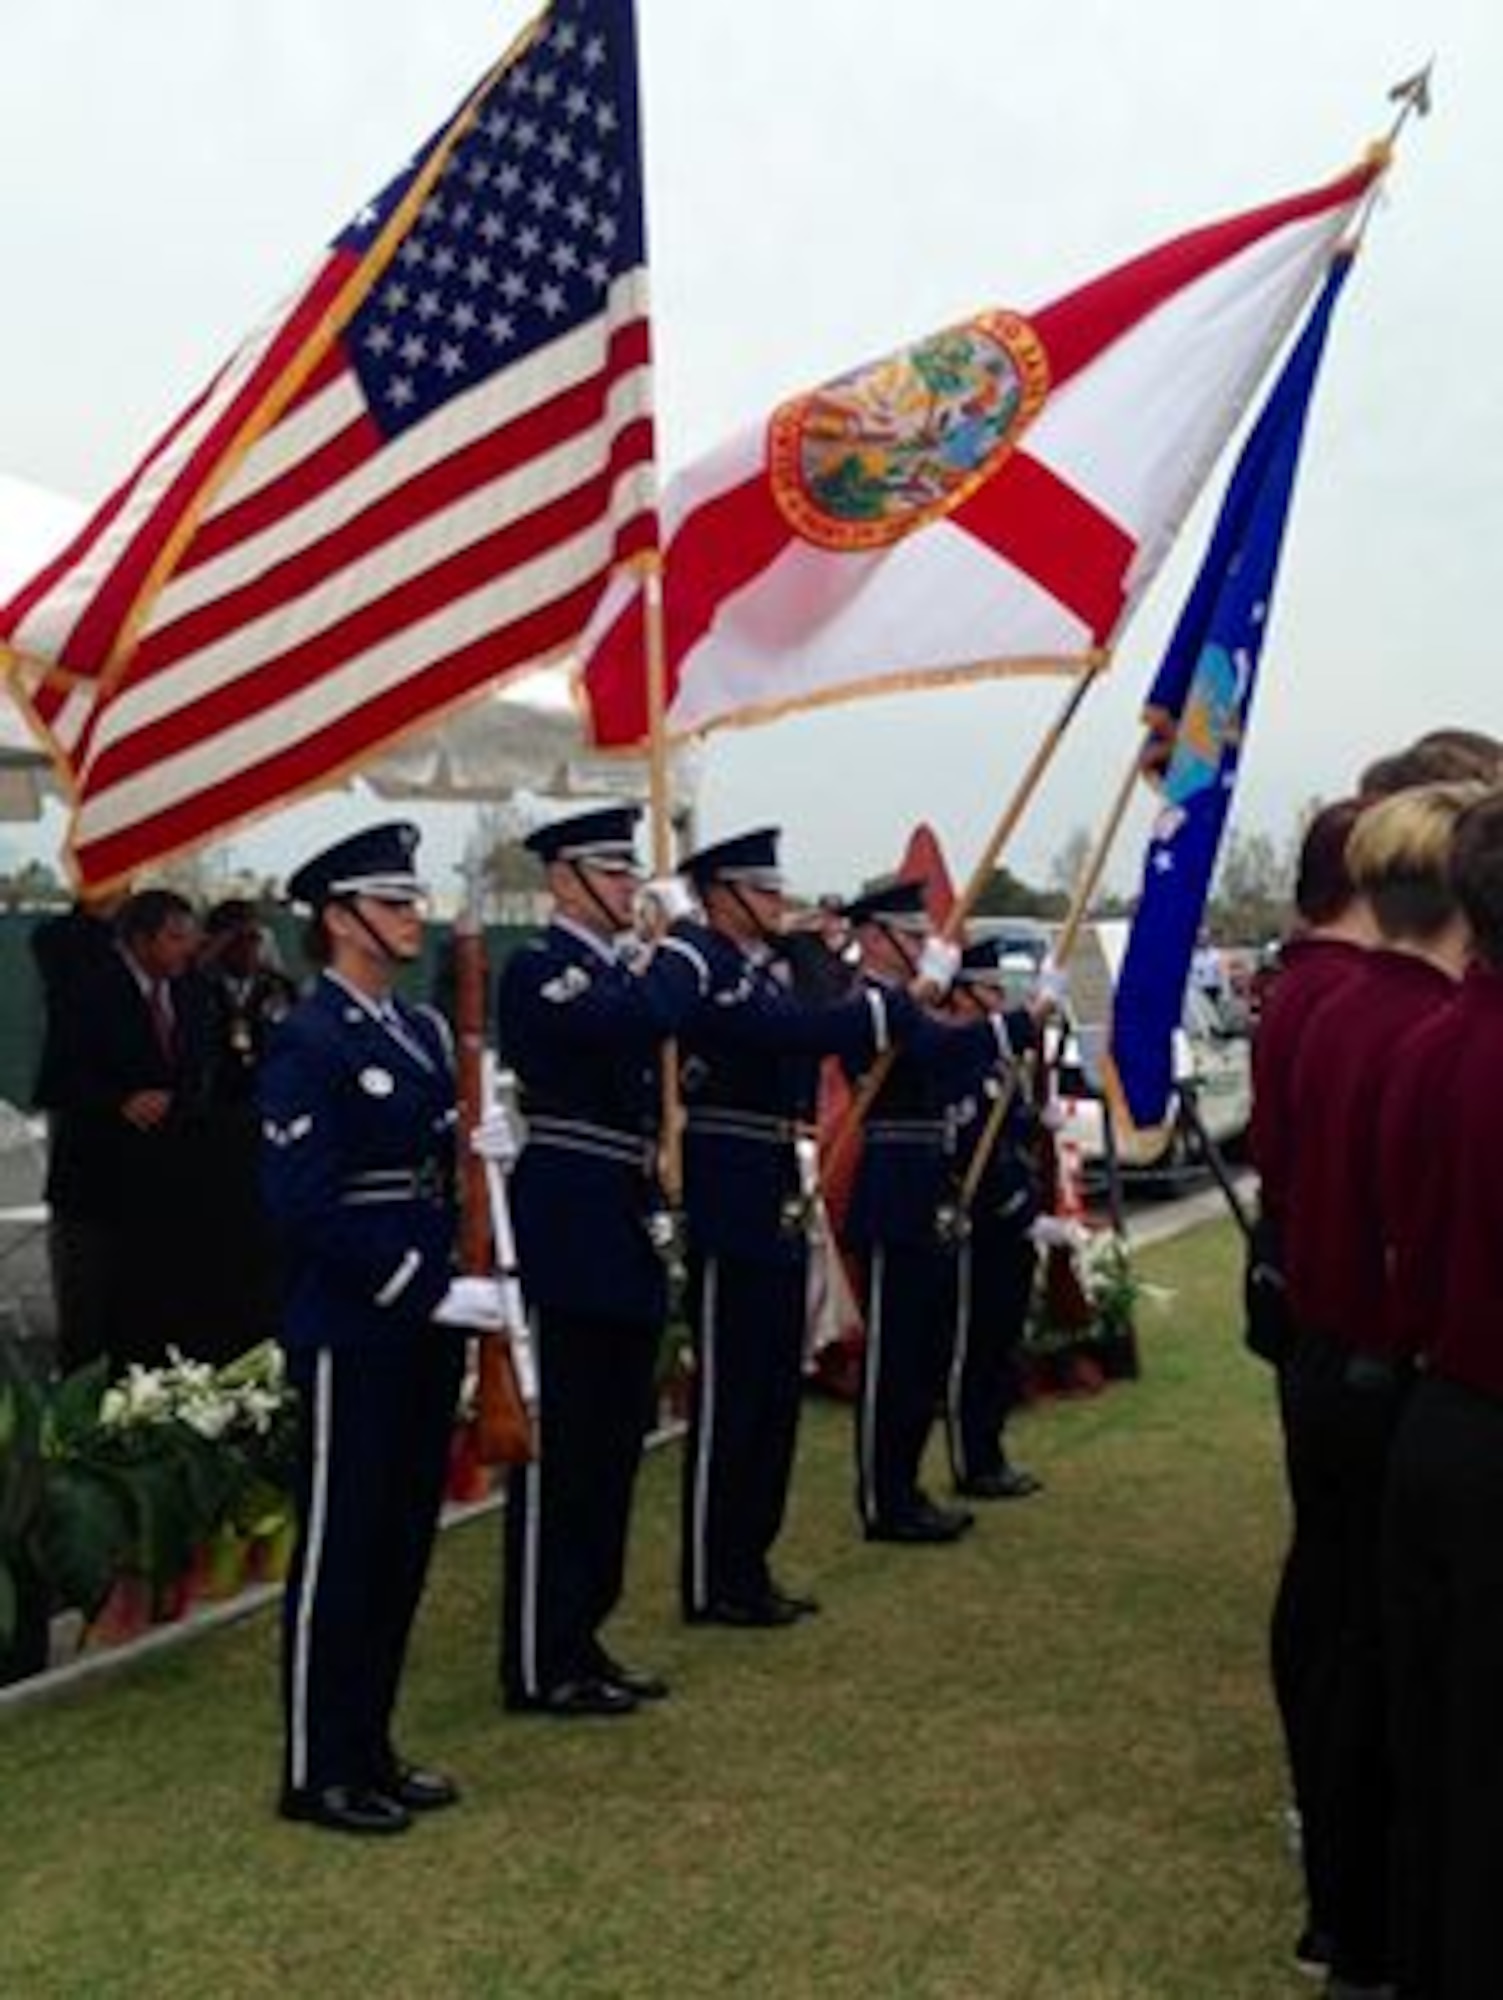 Members of the Patrick Air Force Base Honor Guard present the colors during a Vietnam War Commemoration, 50th Anniversary, at the Cape Canaveral National Cemetery, March 29, 2016, in Mims, Fla. The Patrick AFB Honor Guard is an organization, which is congressionally mandated to provide military funeral honors for deceased Air Force, Army Air Force and Army Air Corps veterans, retirees and active duty personnel within the eastern half of Florida--from Volusia County to Miami-Dade. (U.S. Air Force photo/Heidi Hunt) (Released) 